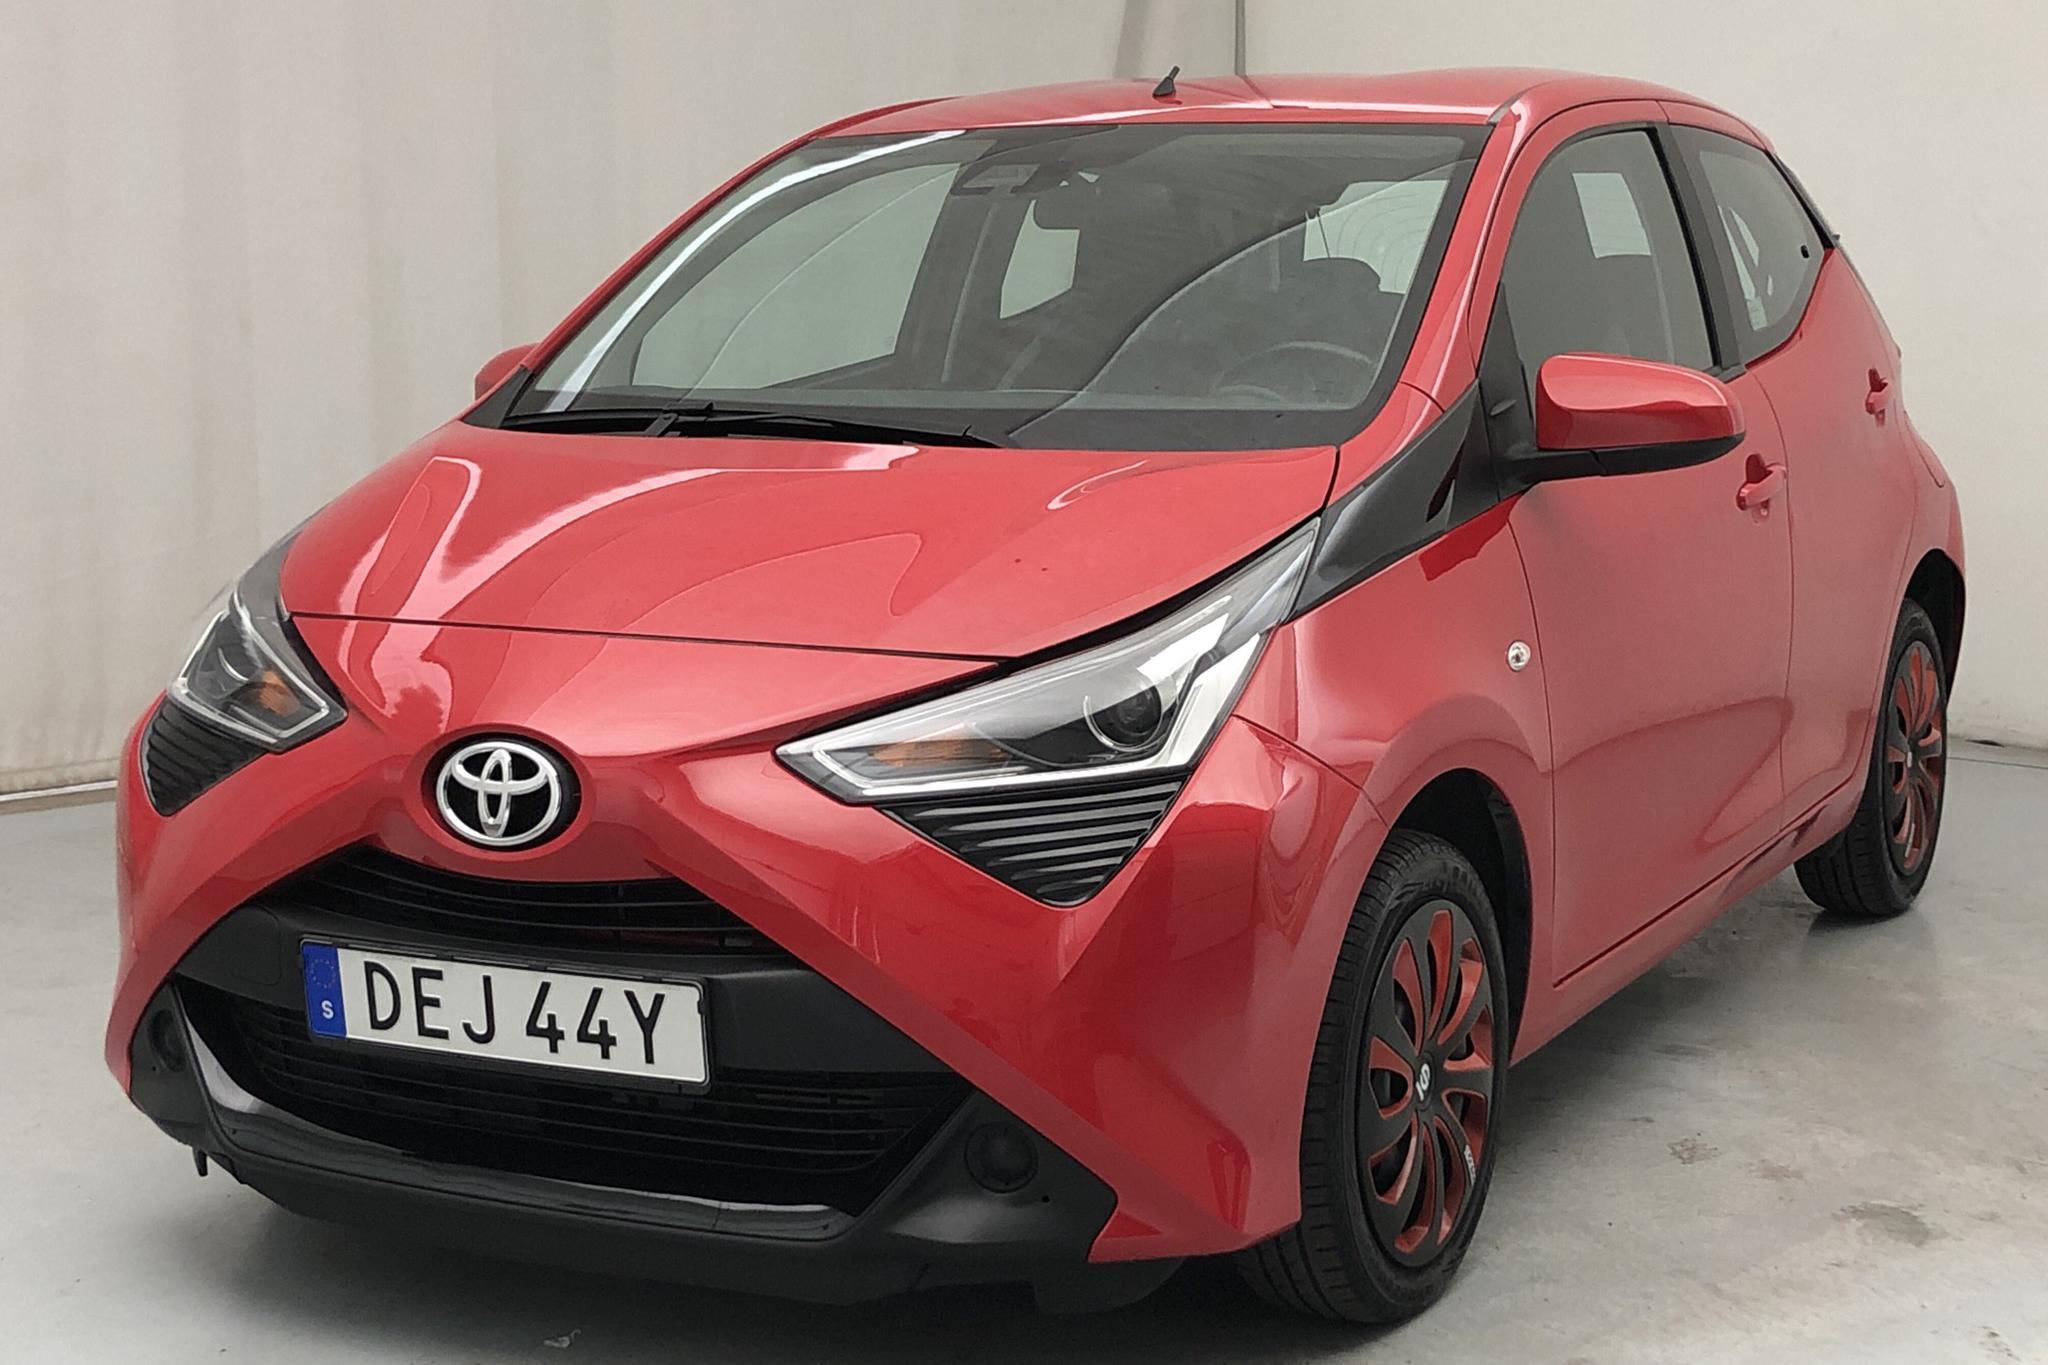 Toyota Aygo 1.0 5dr (72hk) - 59 550 km - Automatic - red - 2019